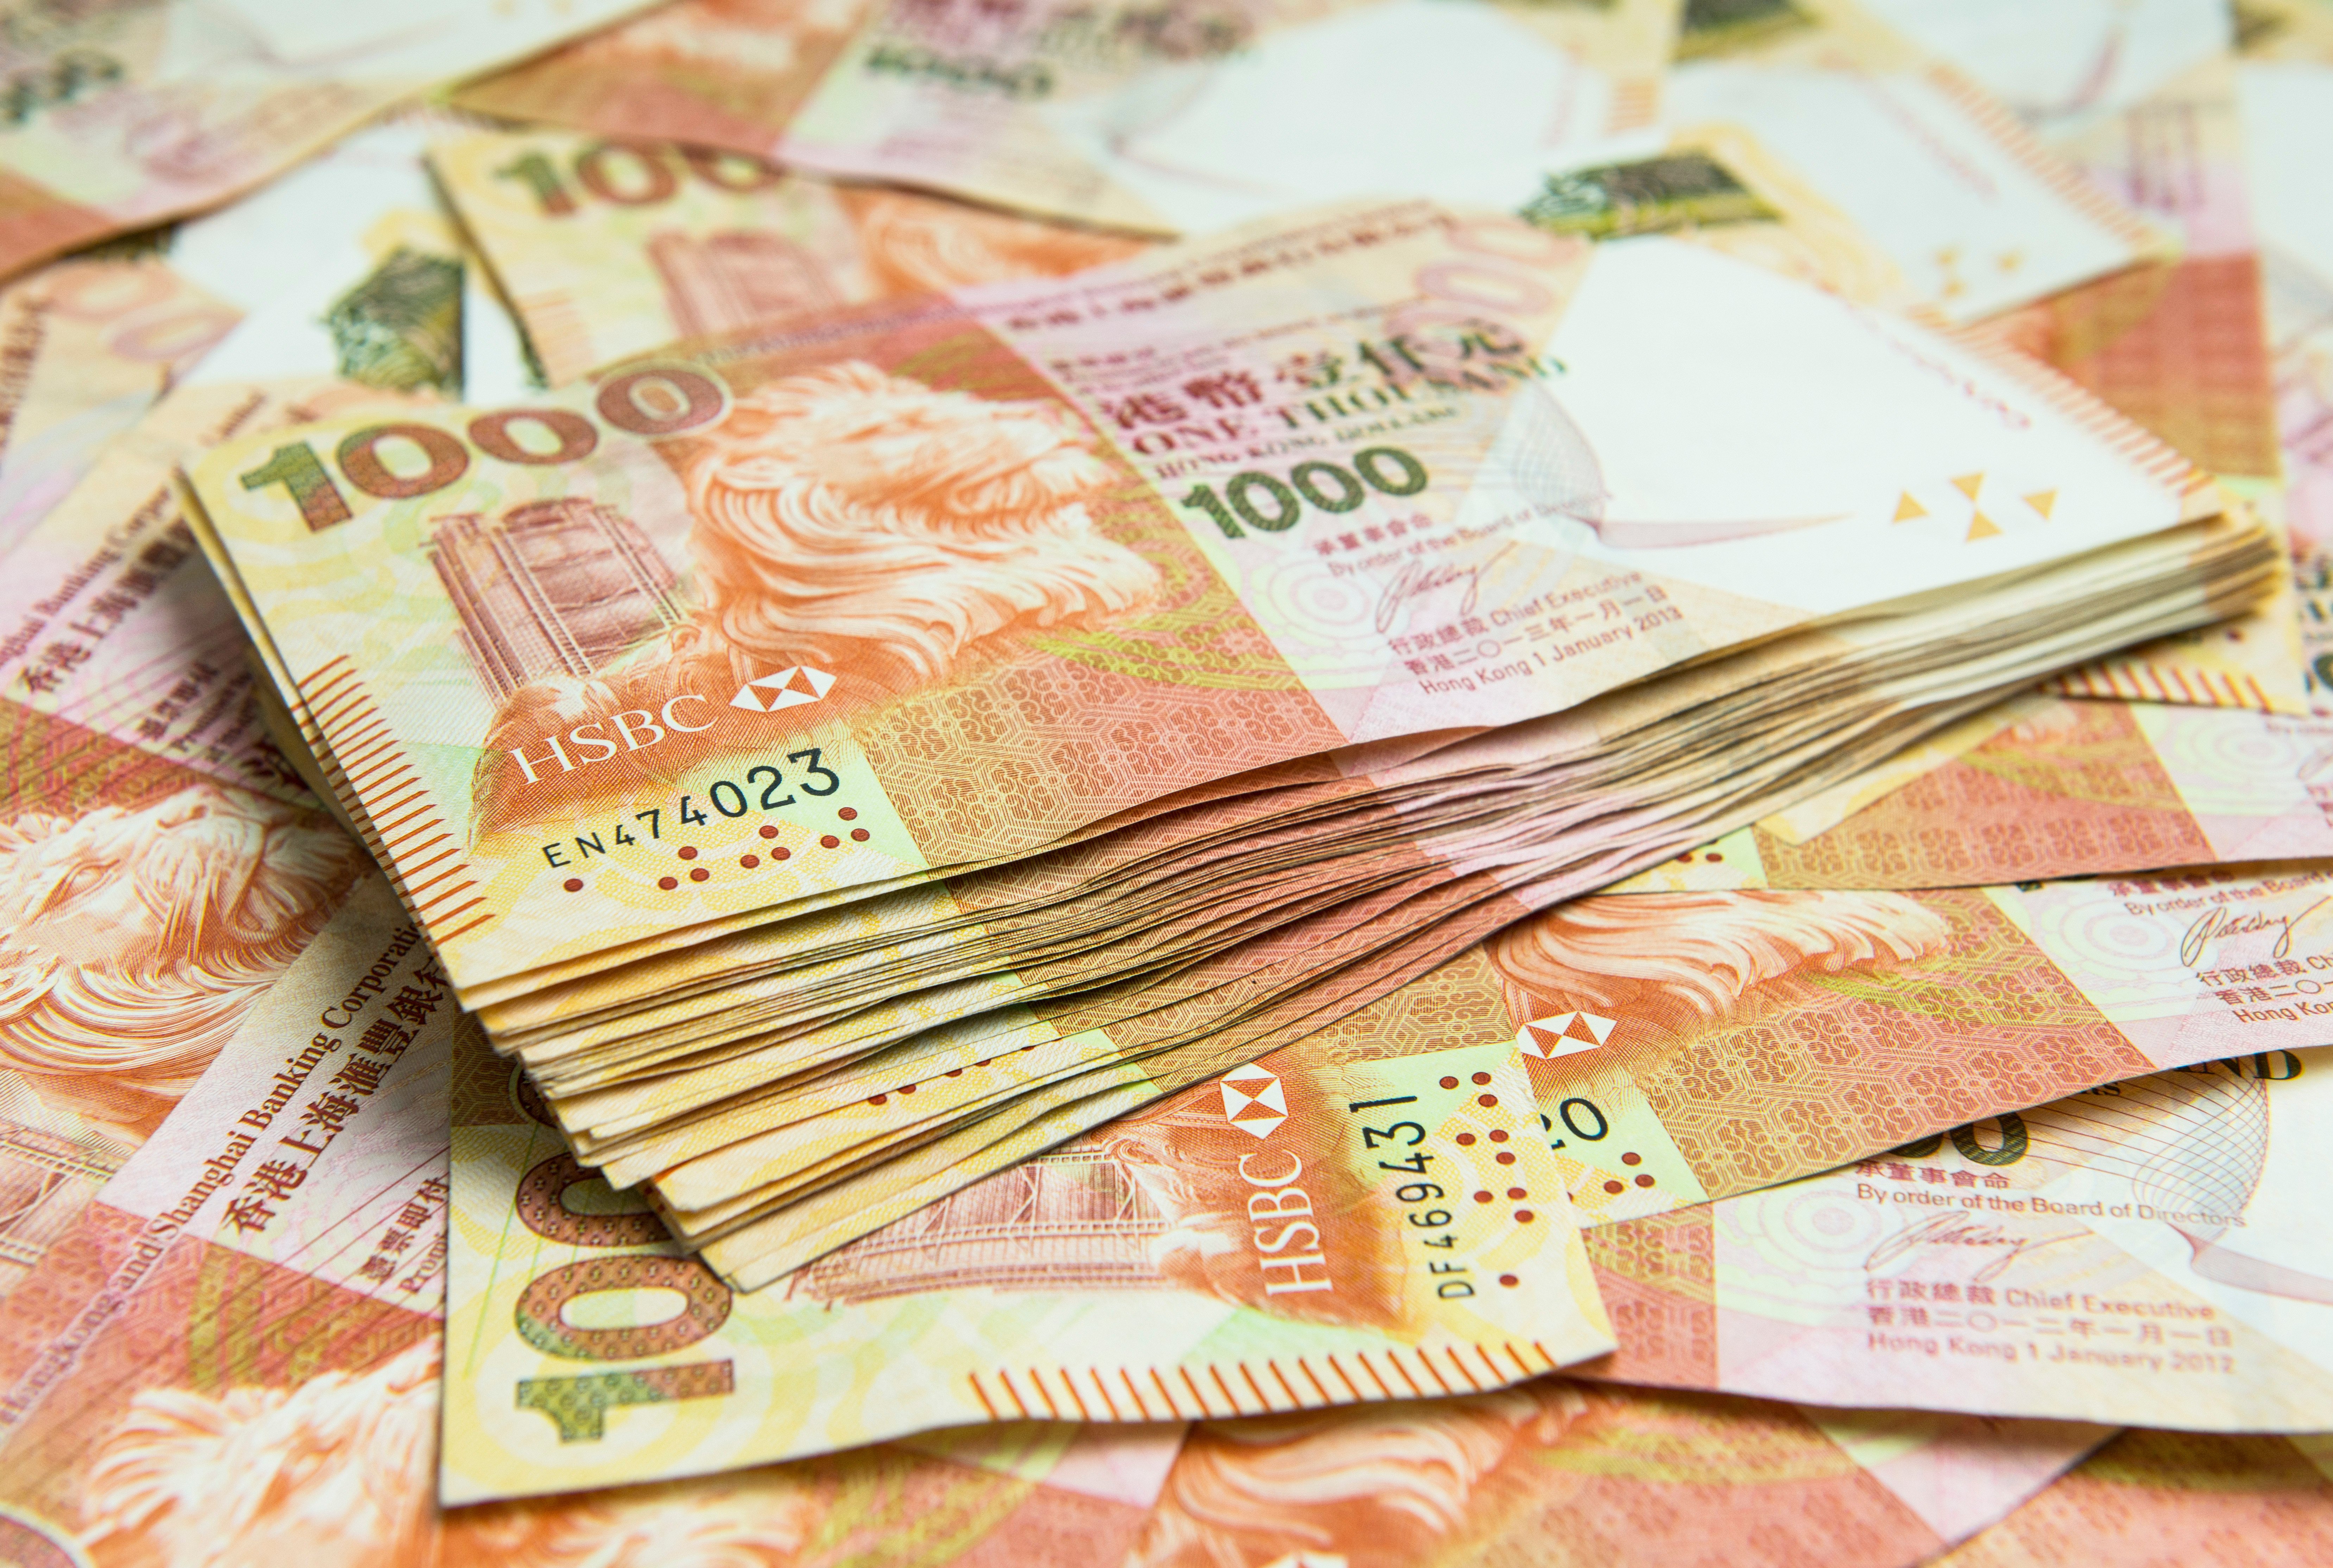 Hong Kong dollar deposits dropped almost 12 per cent in February. Photo: Shutterstock